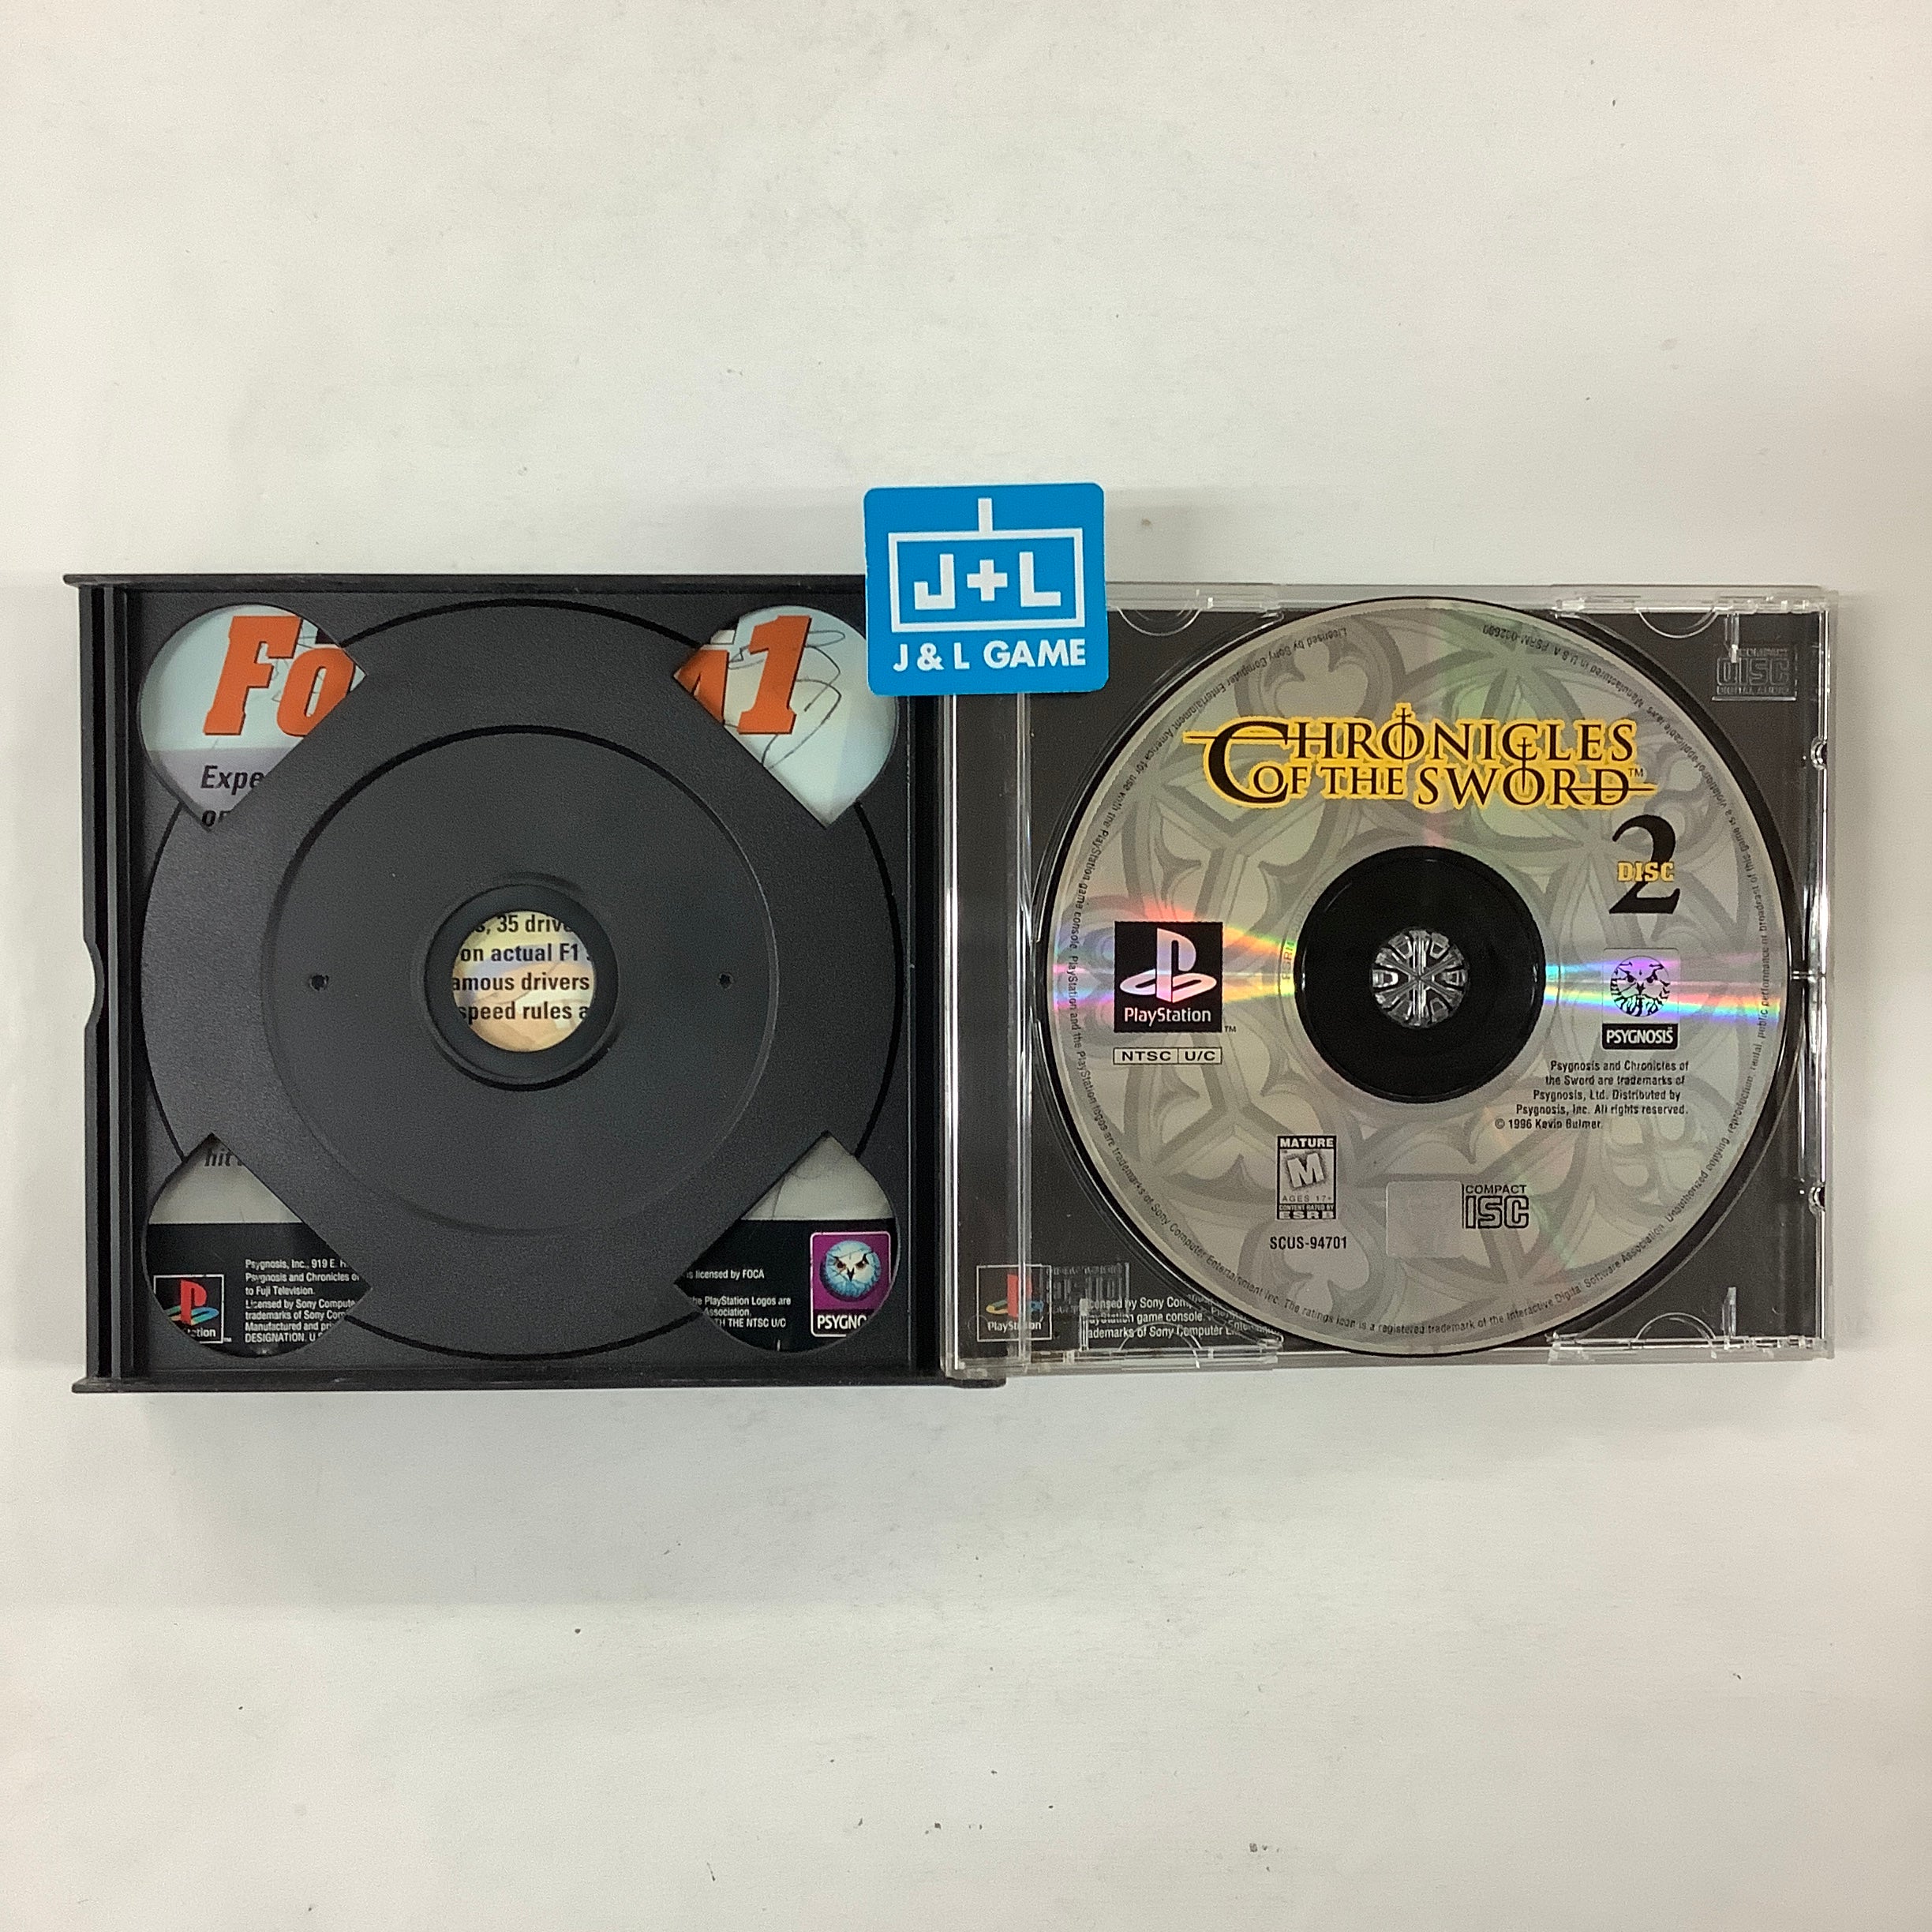 Chronicles of the Sword - (PS1) PlayStation 1 [Pre-Owned] Video Games Psygnosis   